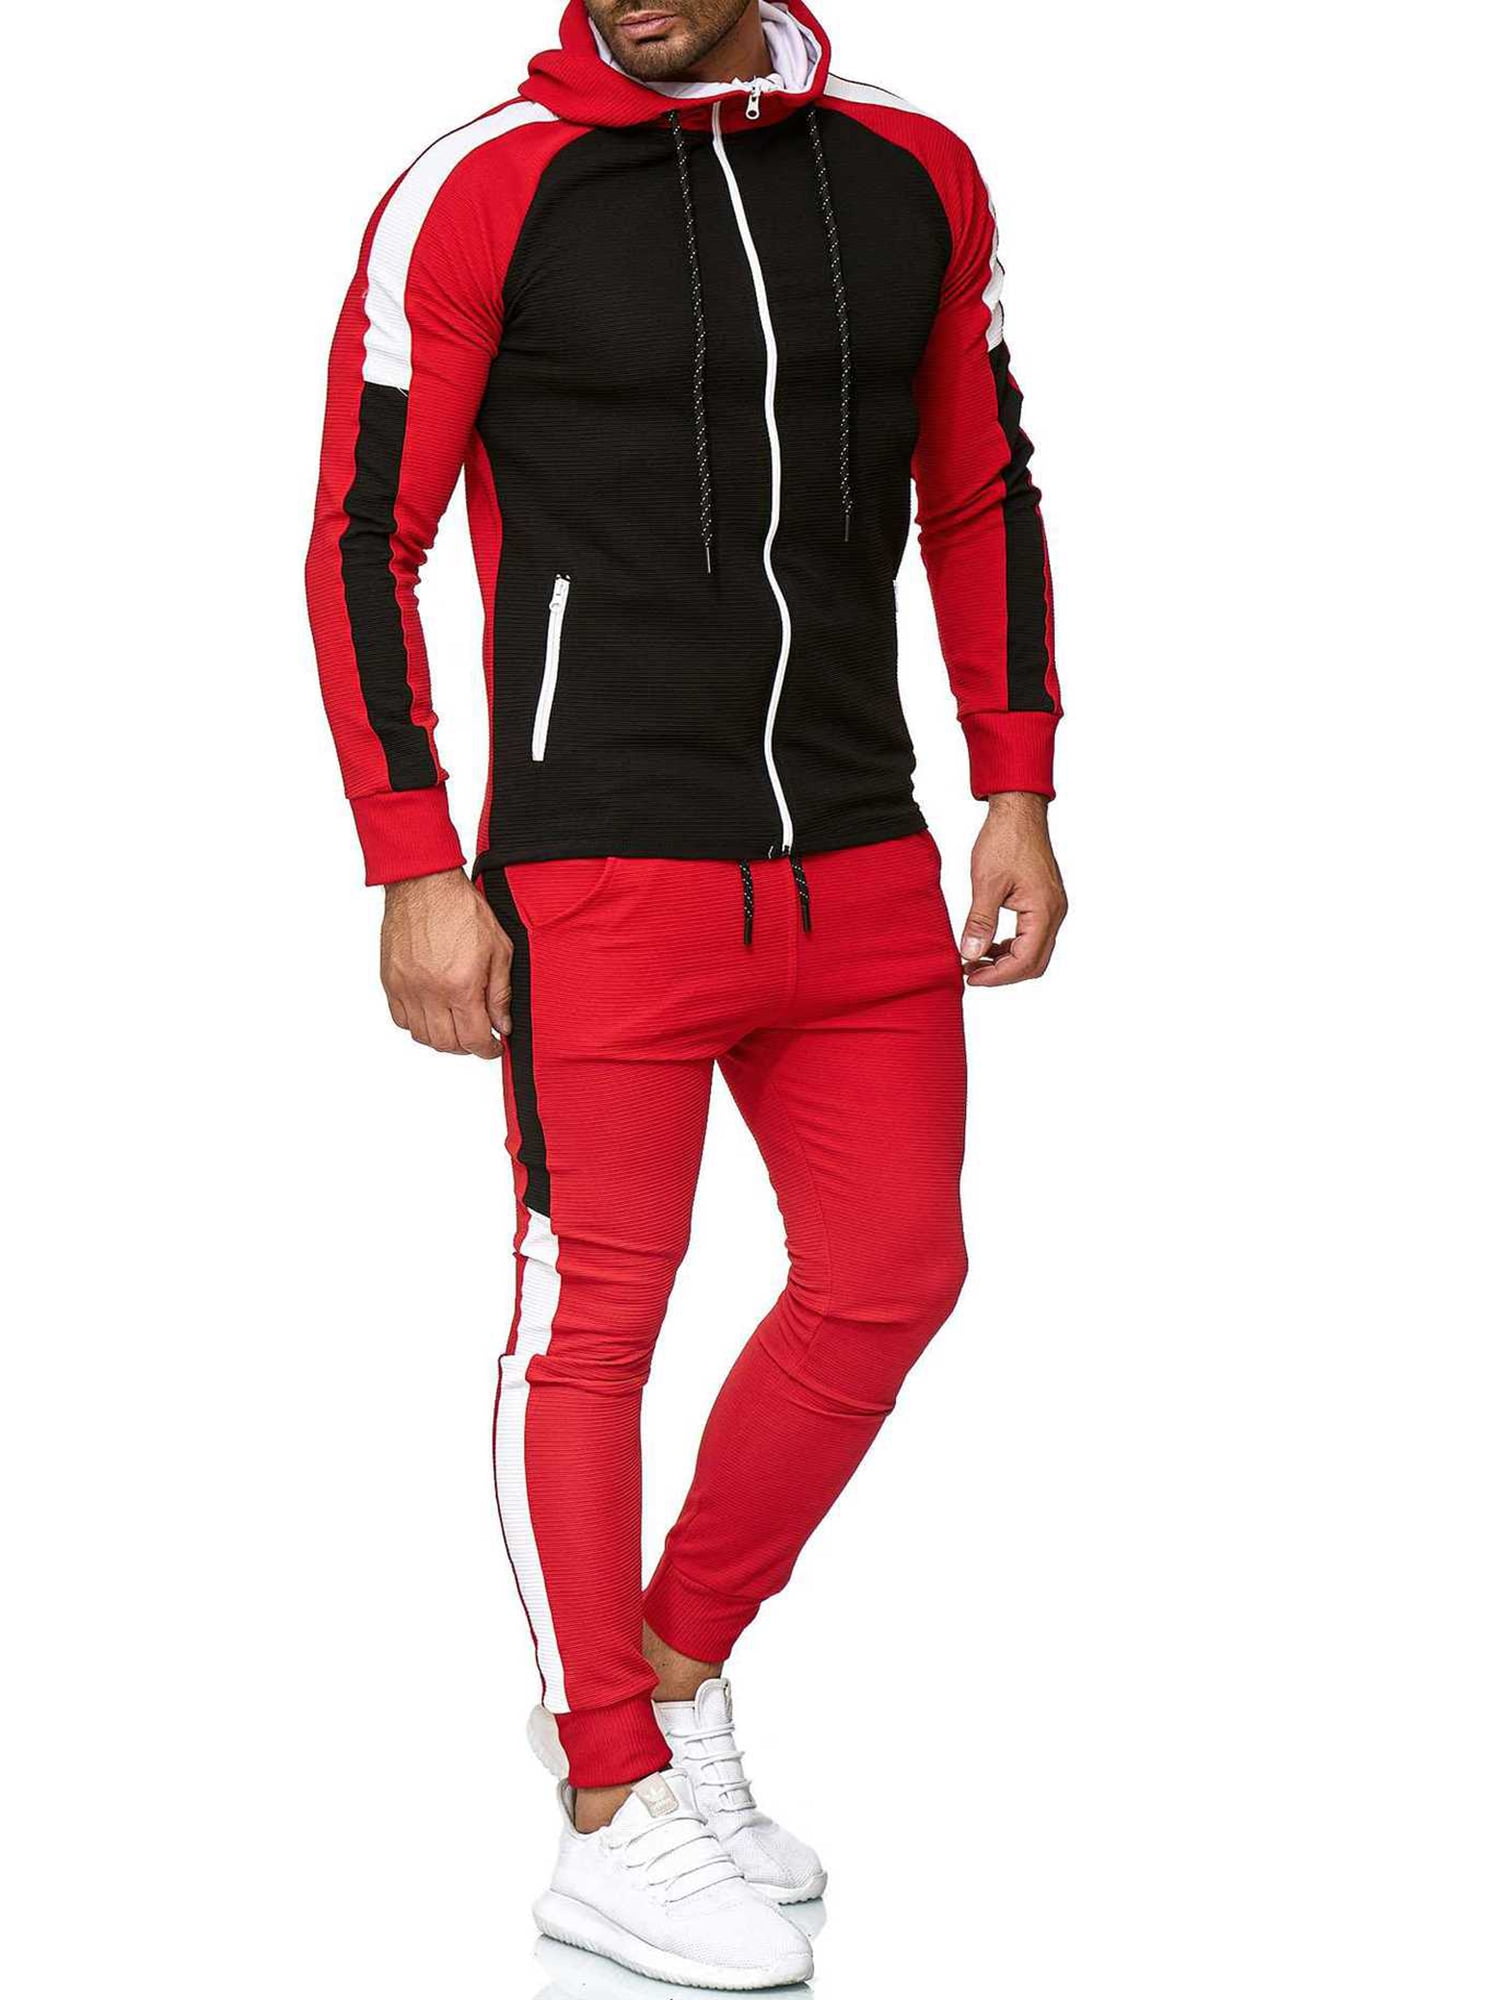 Cotrasen Mens Tracksuit 2 Piece Set Full Zip Casual Running Jogging Athletic Sweatsuit